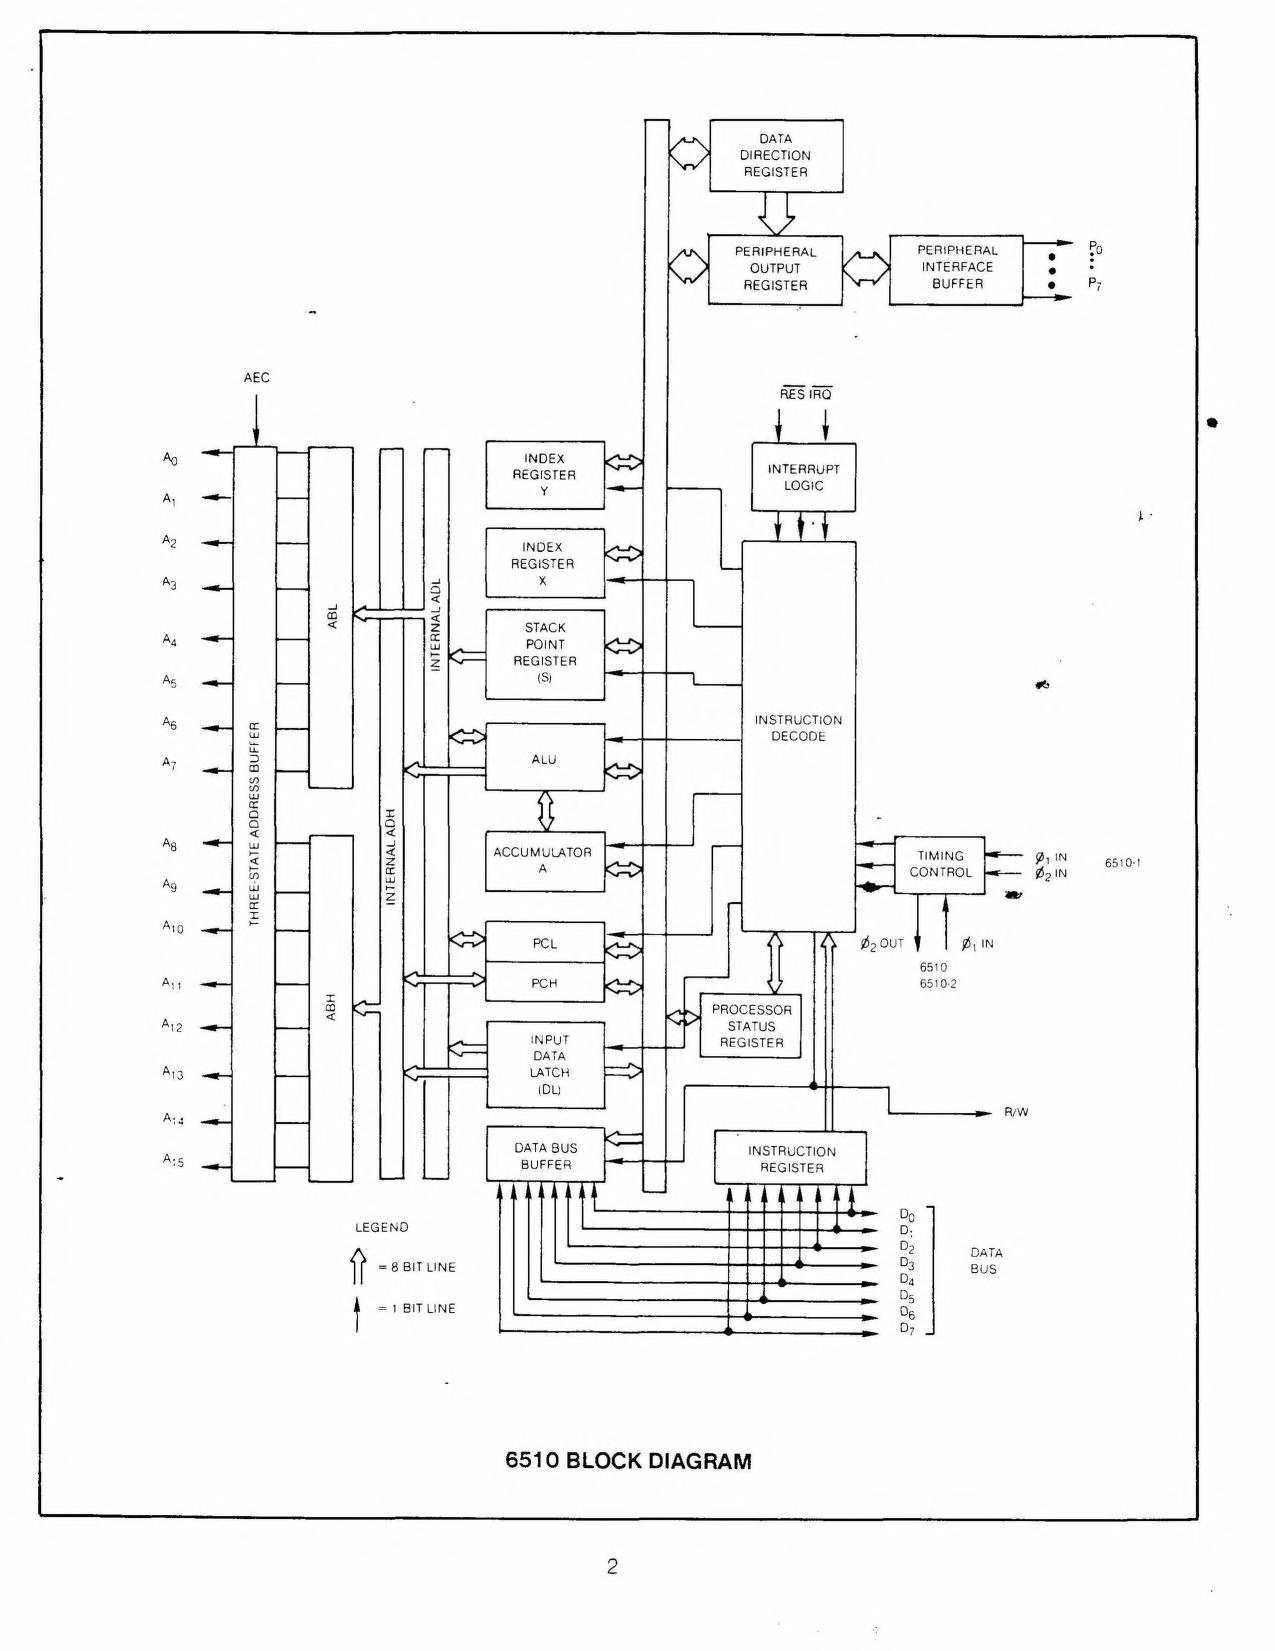 Caroline overraskende Interesse 6510 Microprocessor with I/O - datasheet : Commodore Semiconductor Group :  Free Download, Borrow, and Streaming : Internet Archive